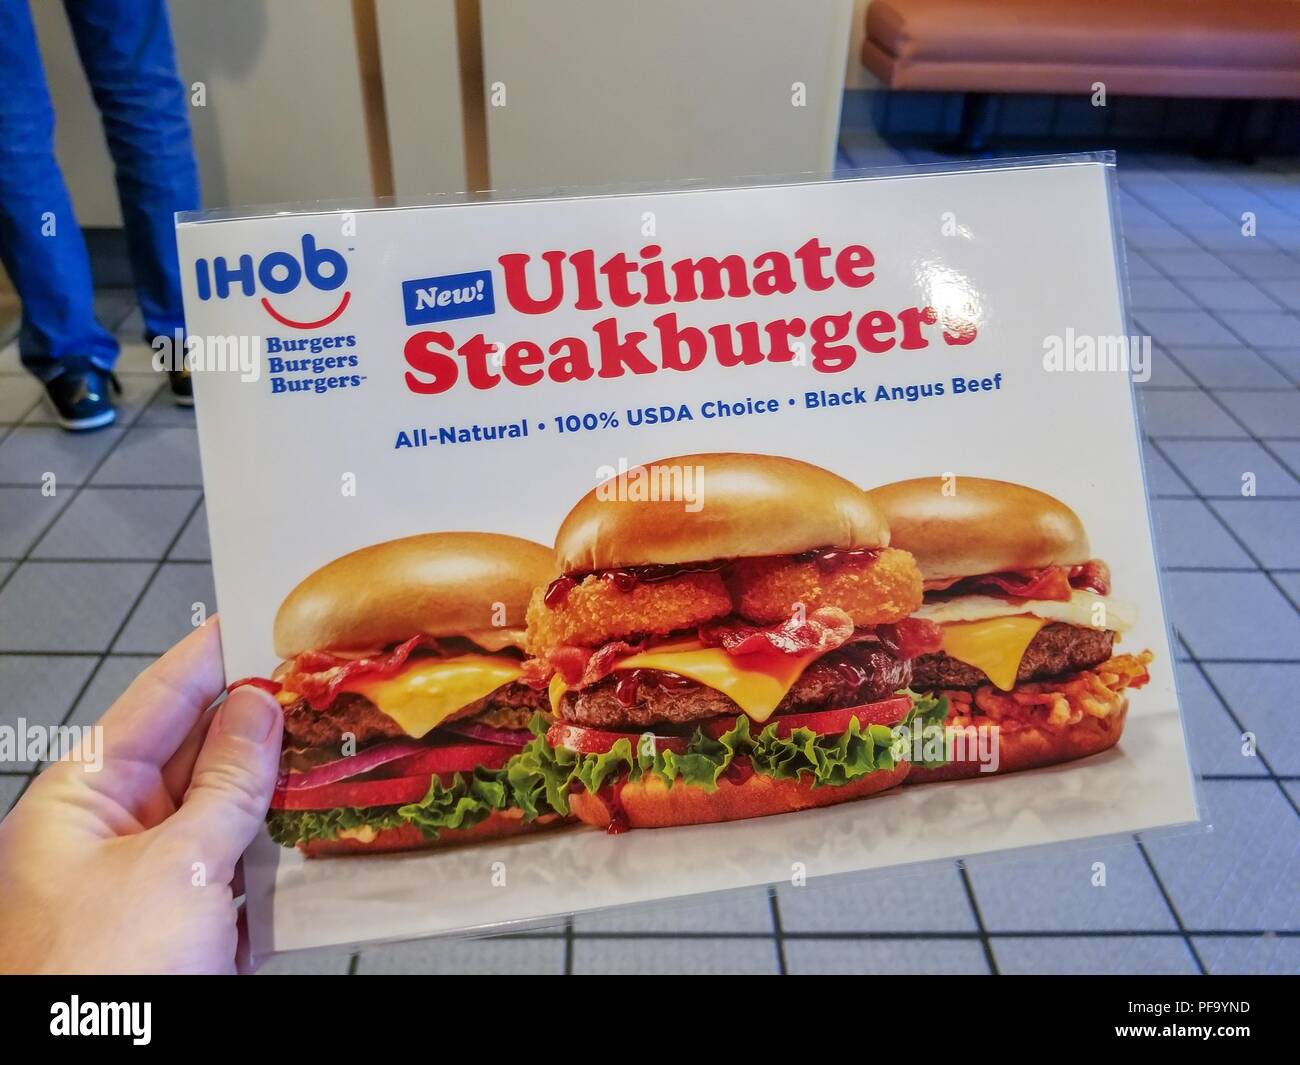 Hand of a man holding a menu with images of several burgers, as well as IHoB (International House of Burgers) logo, following pancake restaurant International House of Pancake's (IHoP) decision to change its name to IHoB, Dublin, California, June 20, 2018. () Stock Photo